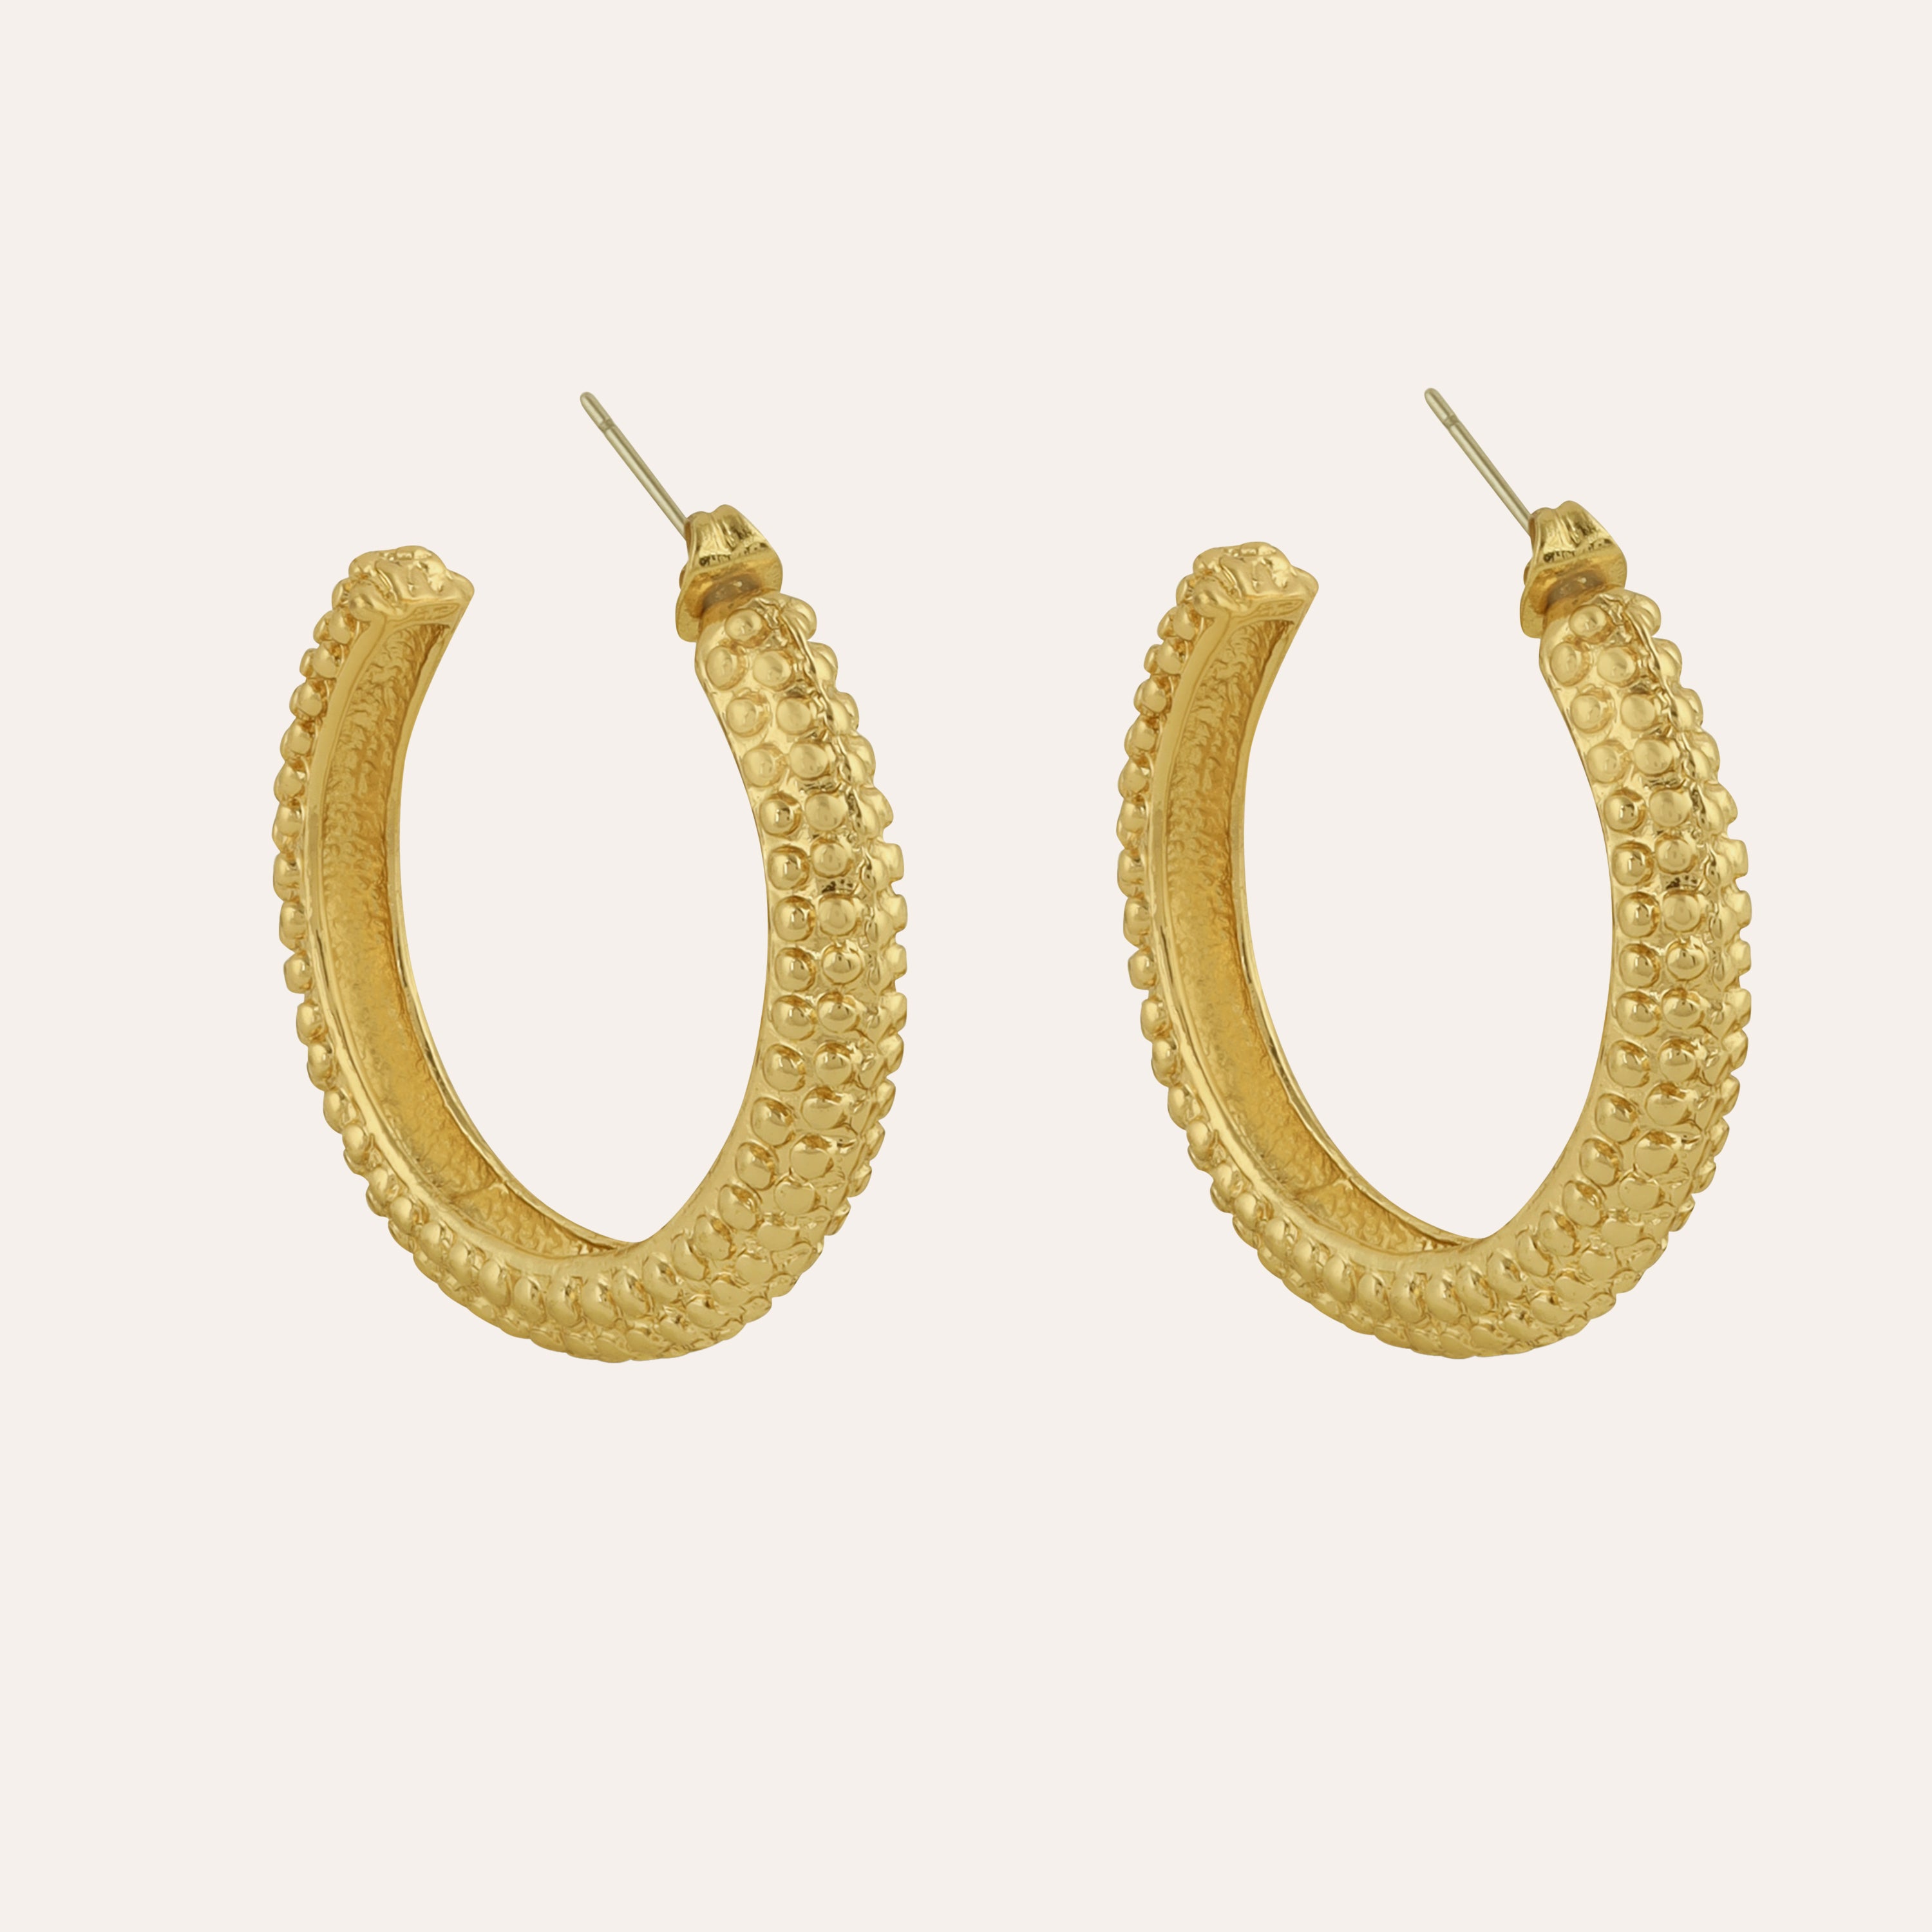 TFC Poppet Gold Plated Hoops Earrings-Discover daily wear gold earrings including stud earrings, hoop earrings, and pearl earrings, perfect as earrings for women and earrings for girls.Find the cheapest fashion jewellery which is anti-tarnis​h only at The Fun company